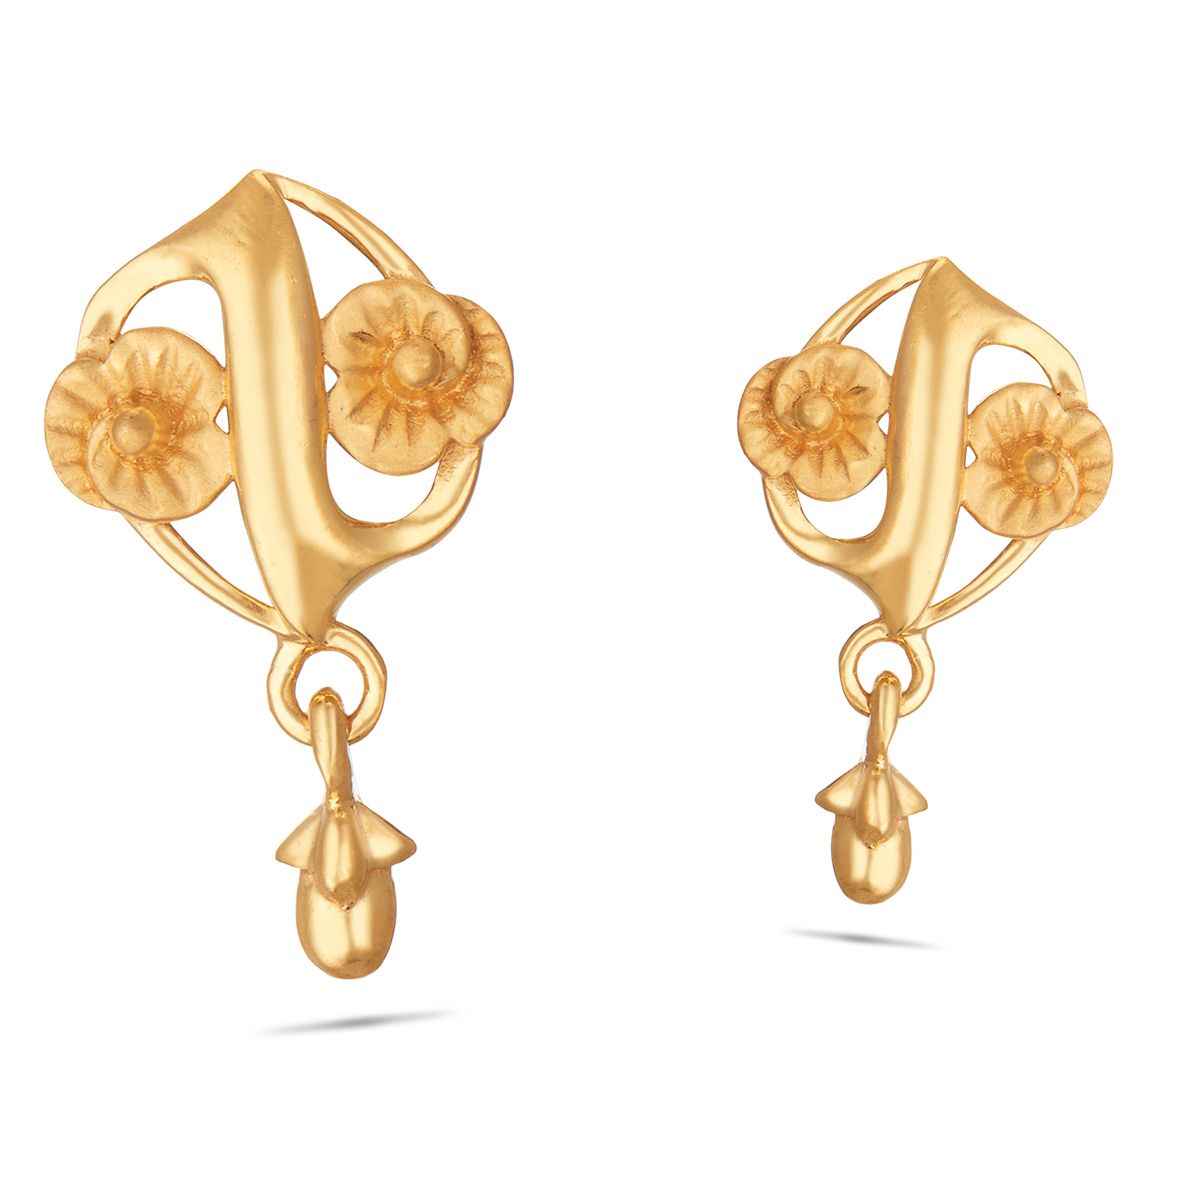 Buy South Indian Traditional Daily Wear Gold Covering Jhumkas Earrings